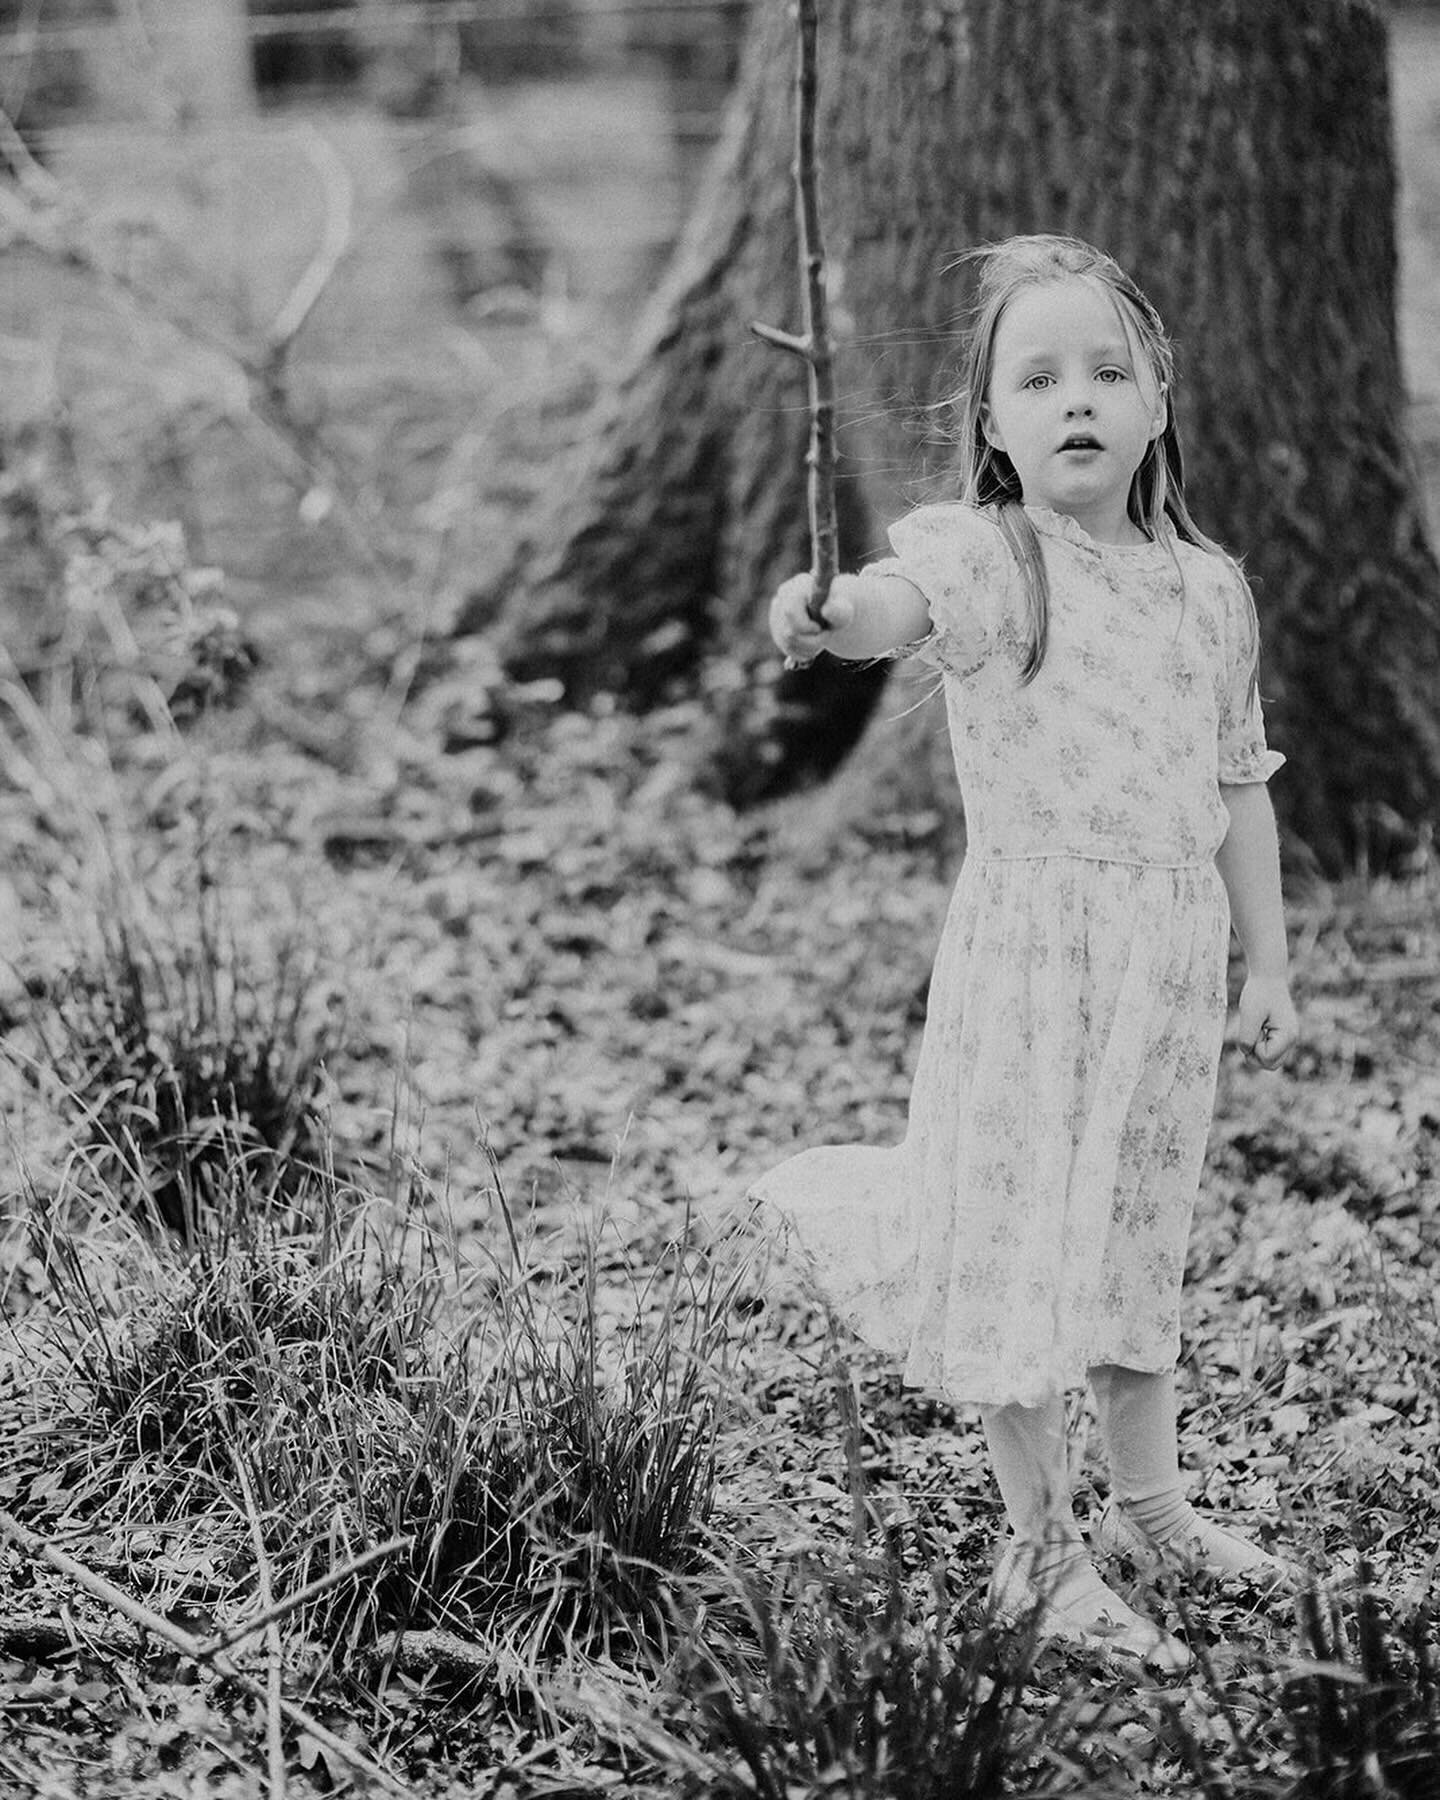 Elodie&hellip; 

I&rsquo;m dog tired of thinking about curating my grid. So many images I don&rsquo;t get out . So many images I love. These being some of them as they really show this strong little girl&rsquo;s character- the best sort of girl. 

I&